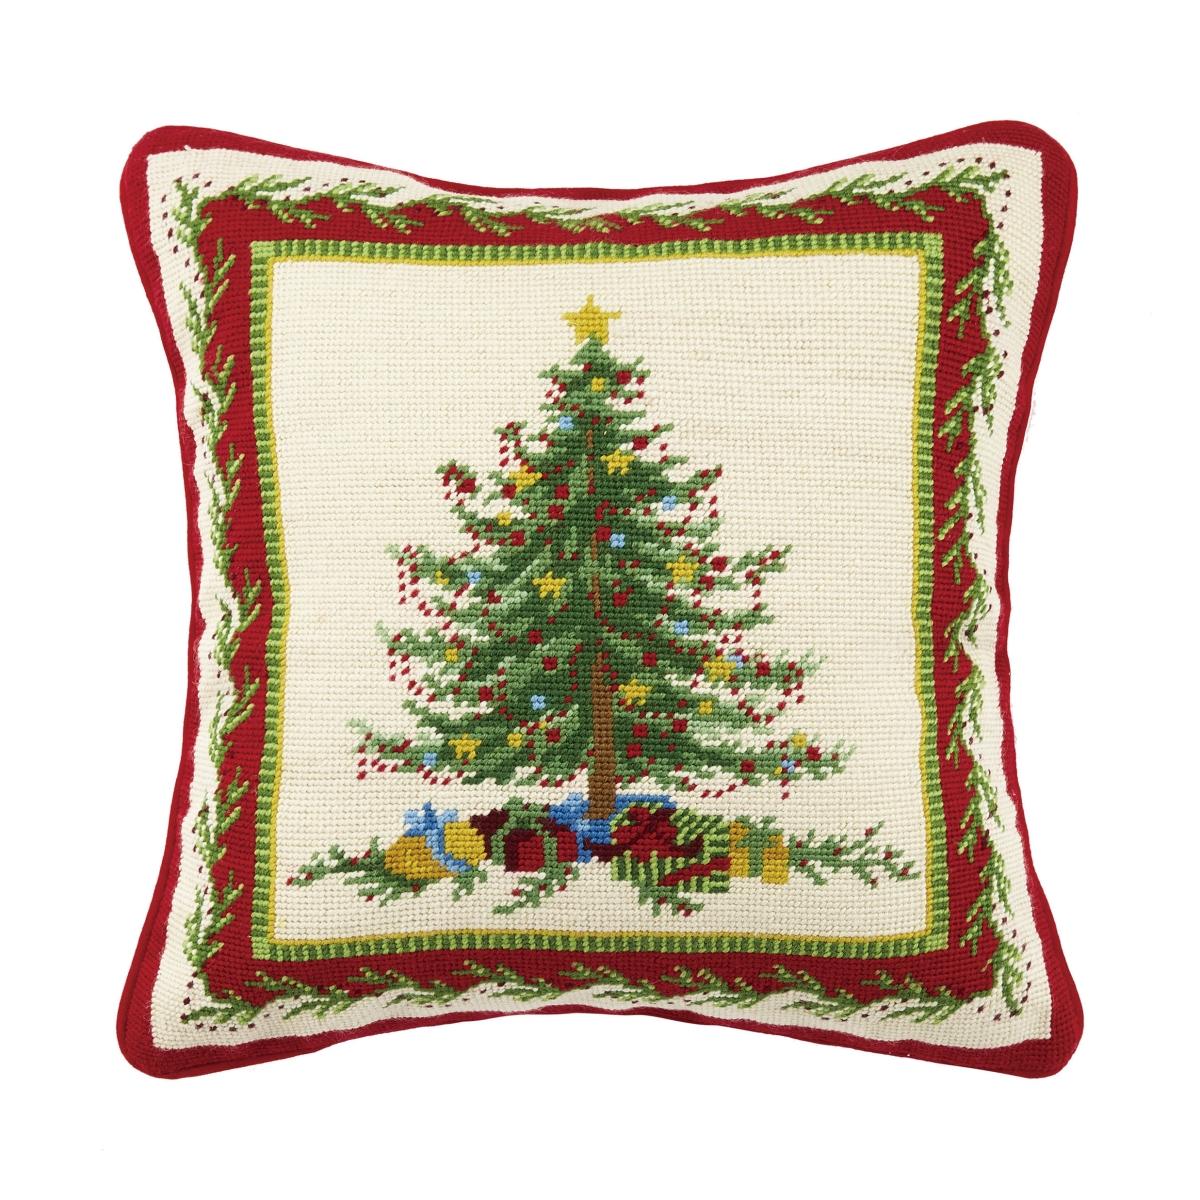 Picture of Peking Handicraft 31SERX252C16SQ 16 x 16 in. Old Fashioned Christmas Tree Poly Filled Needlepoint Pillow